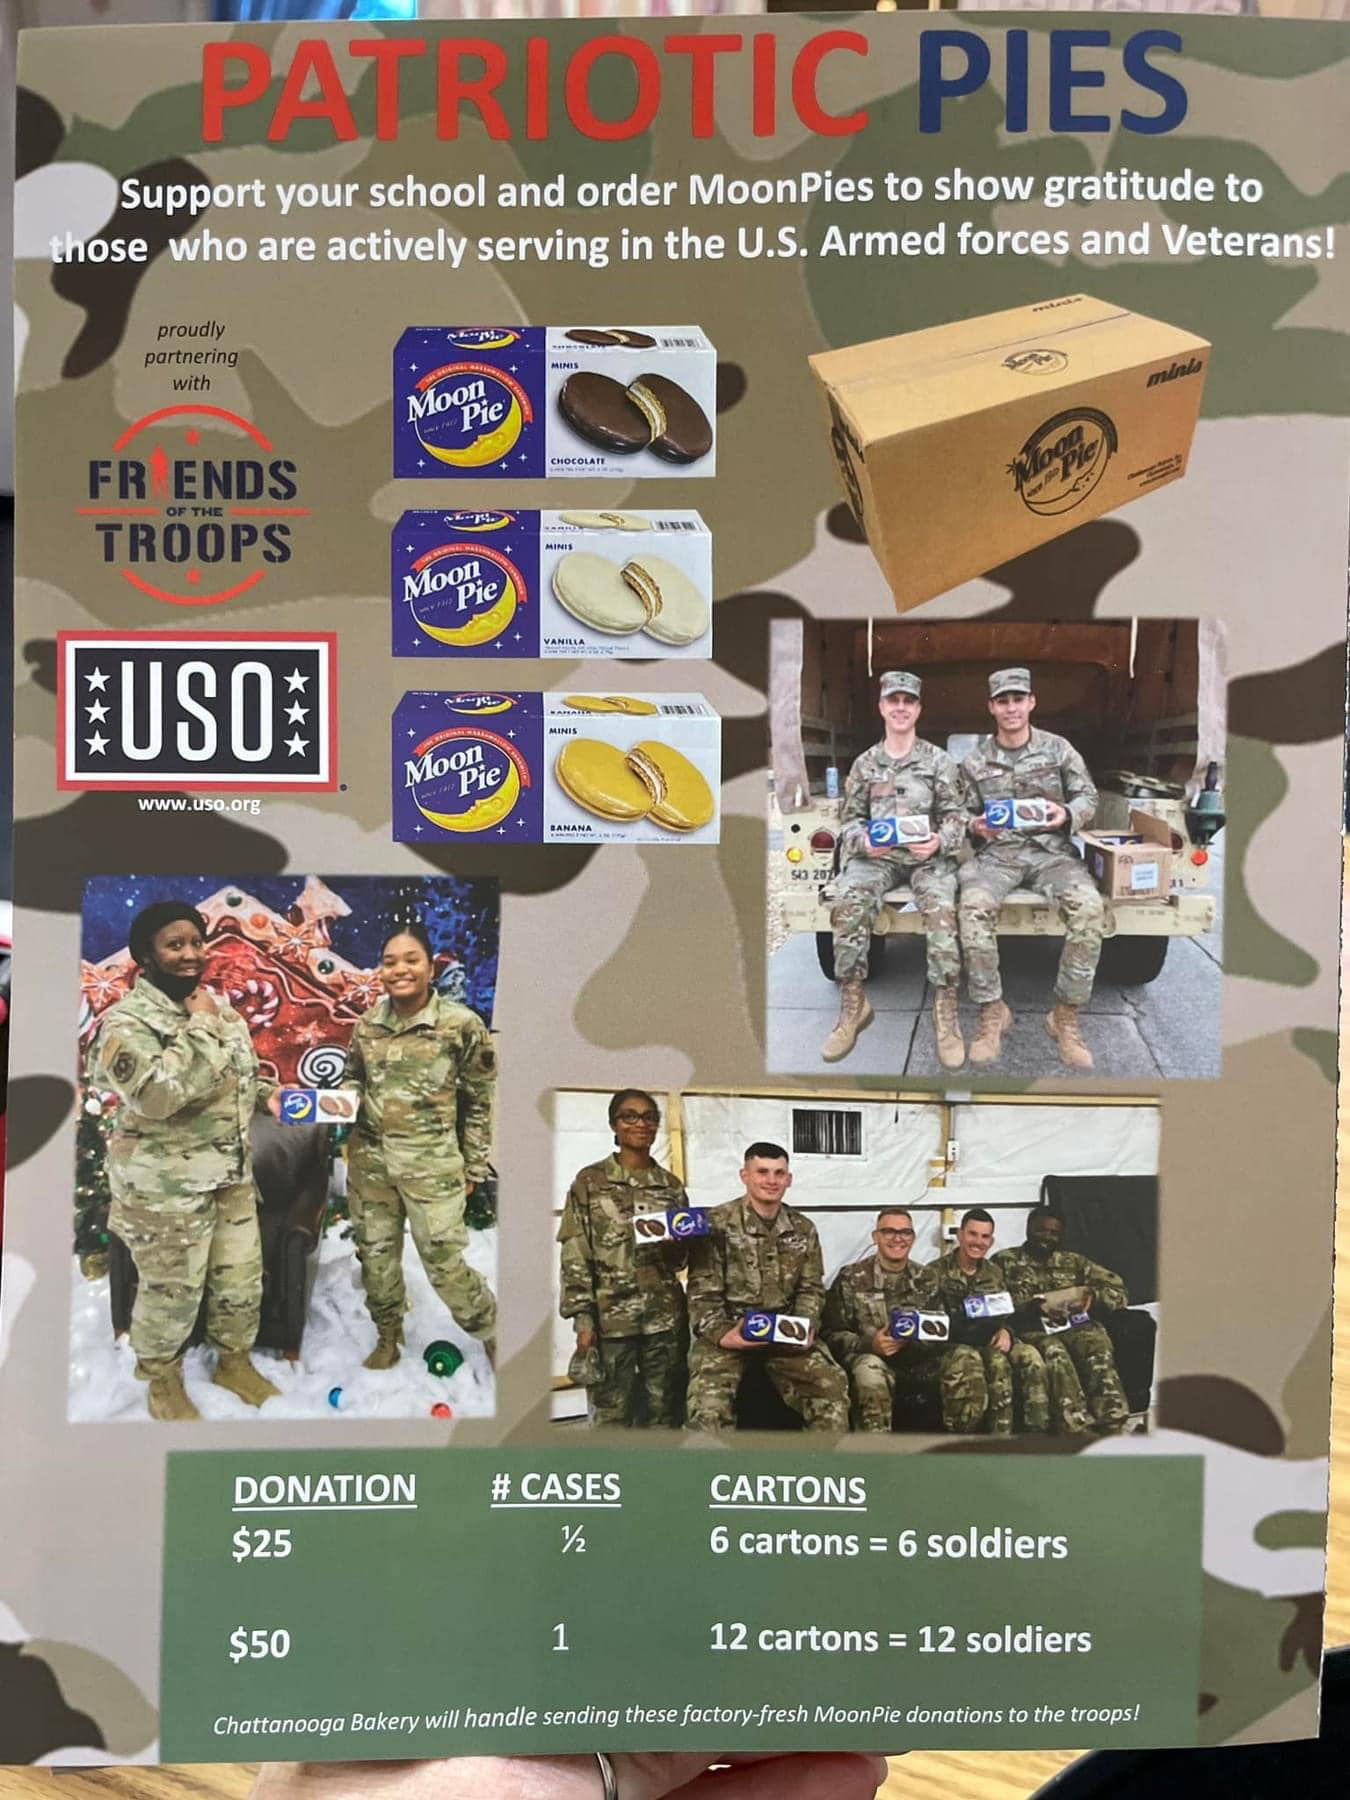 Support the military and send MoonPies to US soldiers. $25 for 36 pies. $50 for 72 pies. 